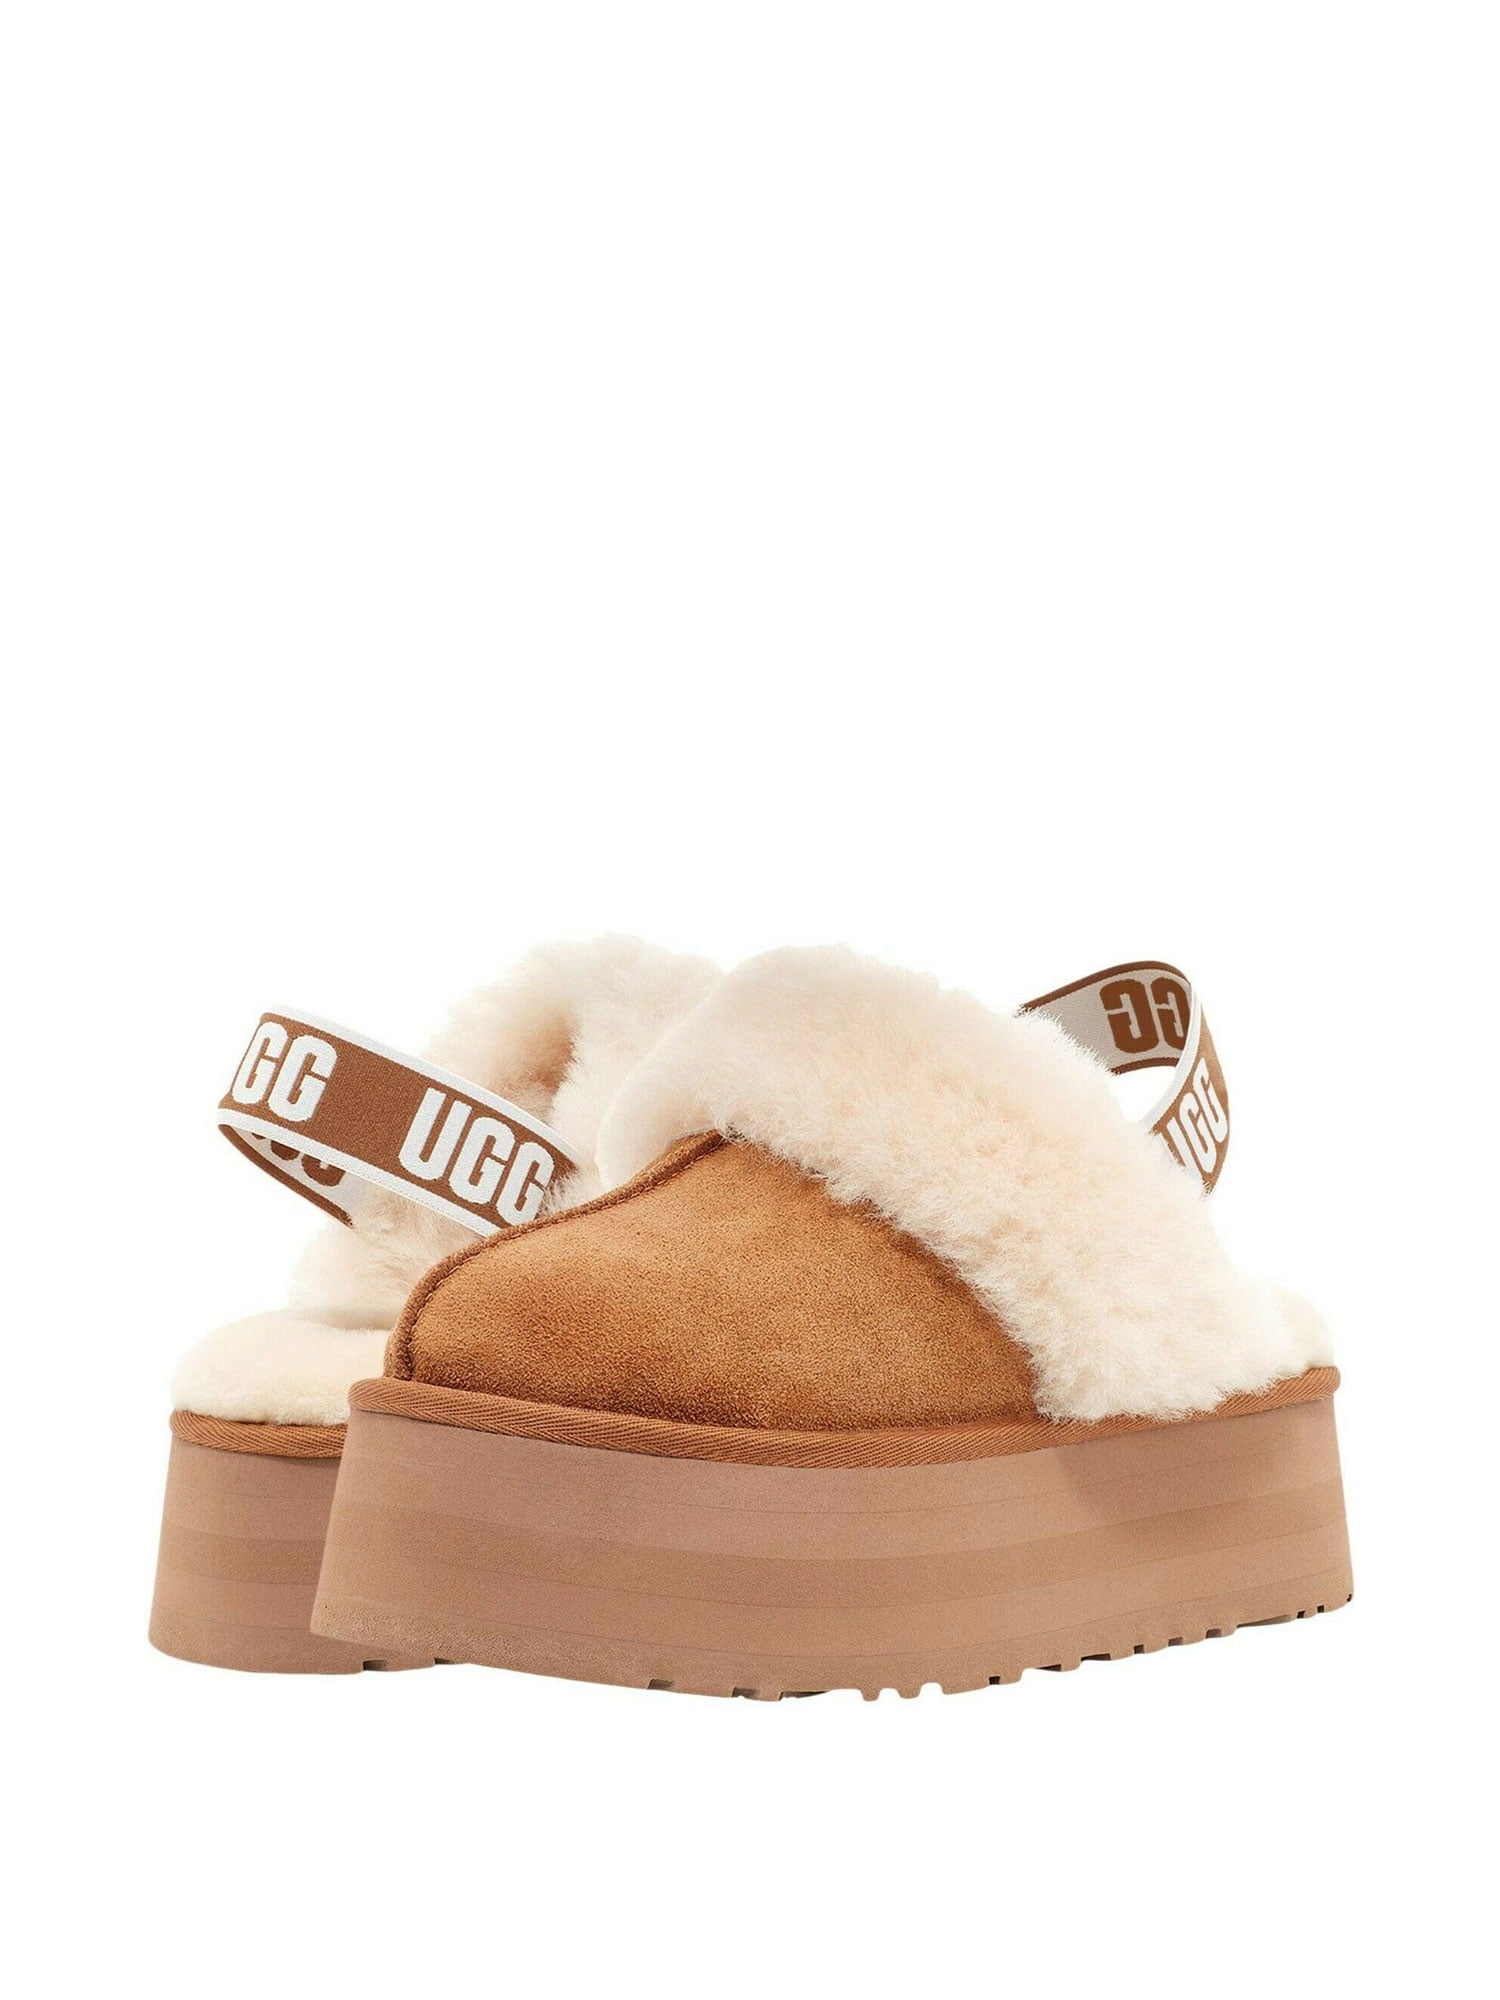 mid brown ugg slippers